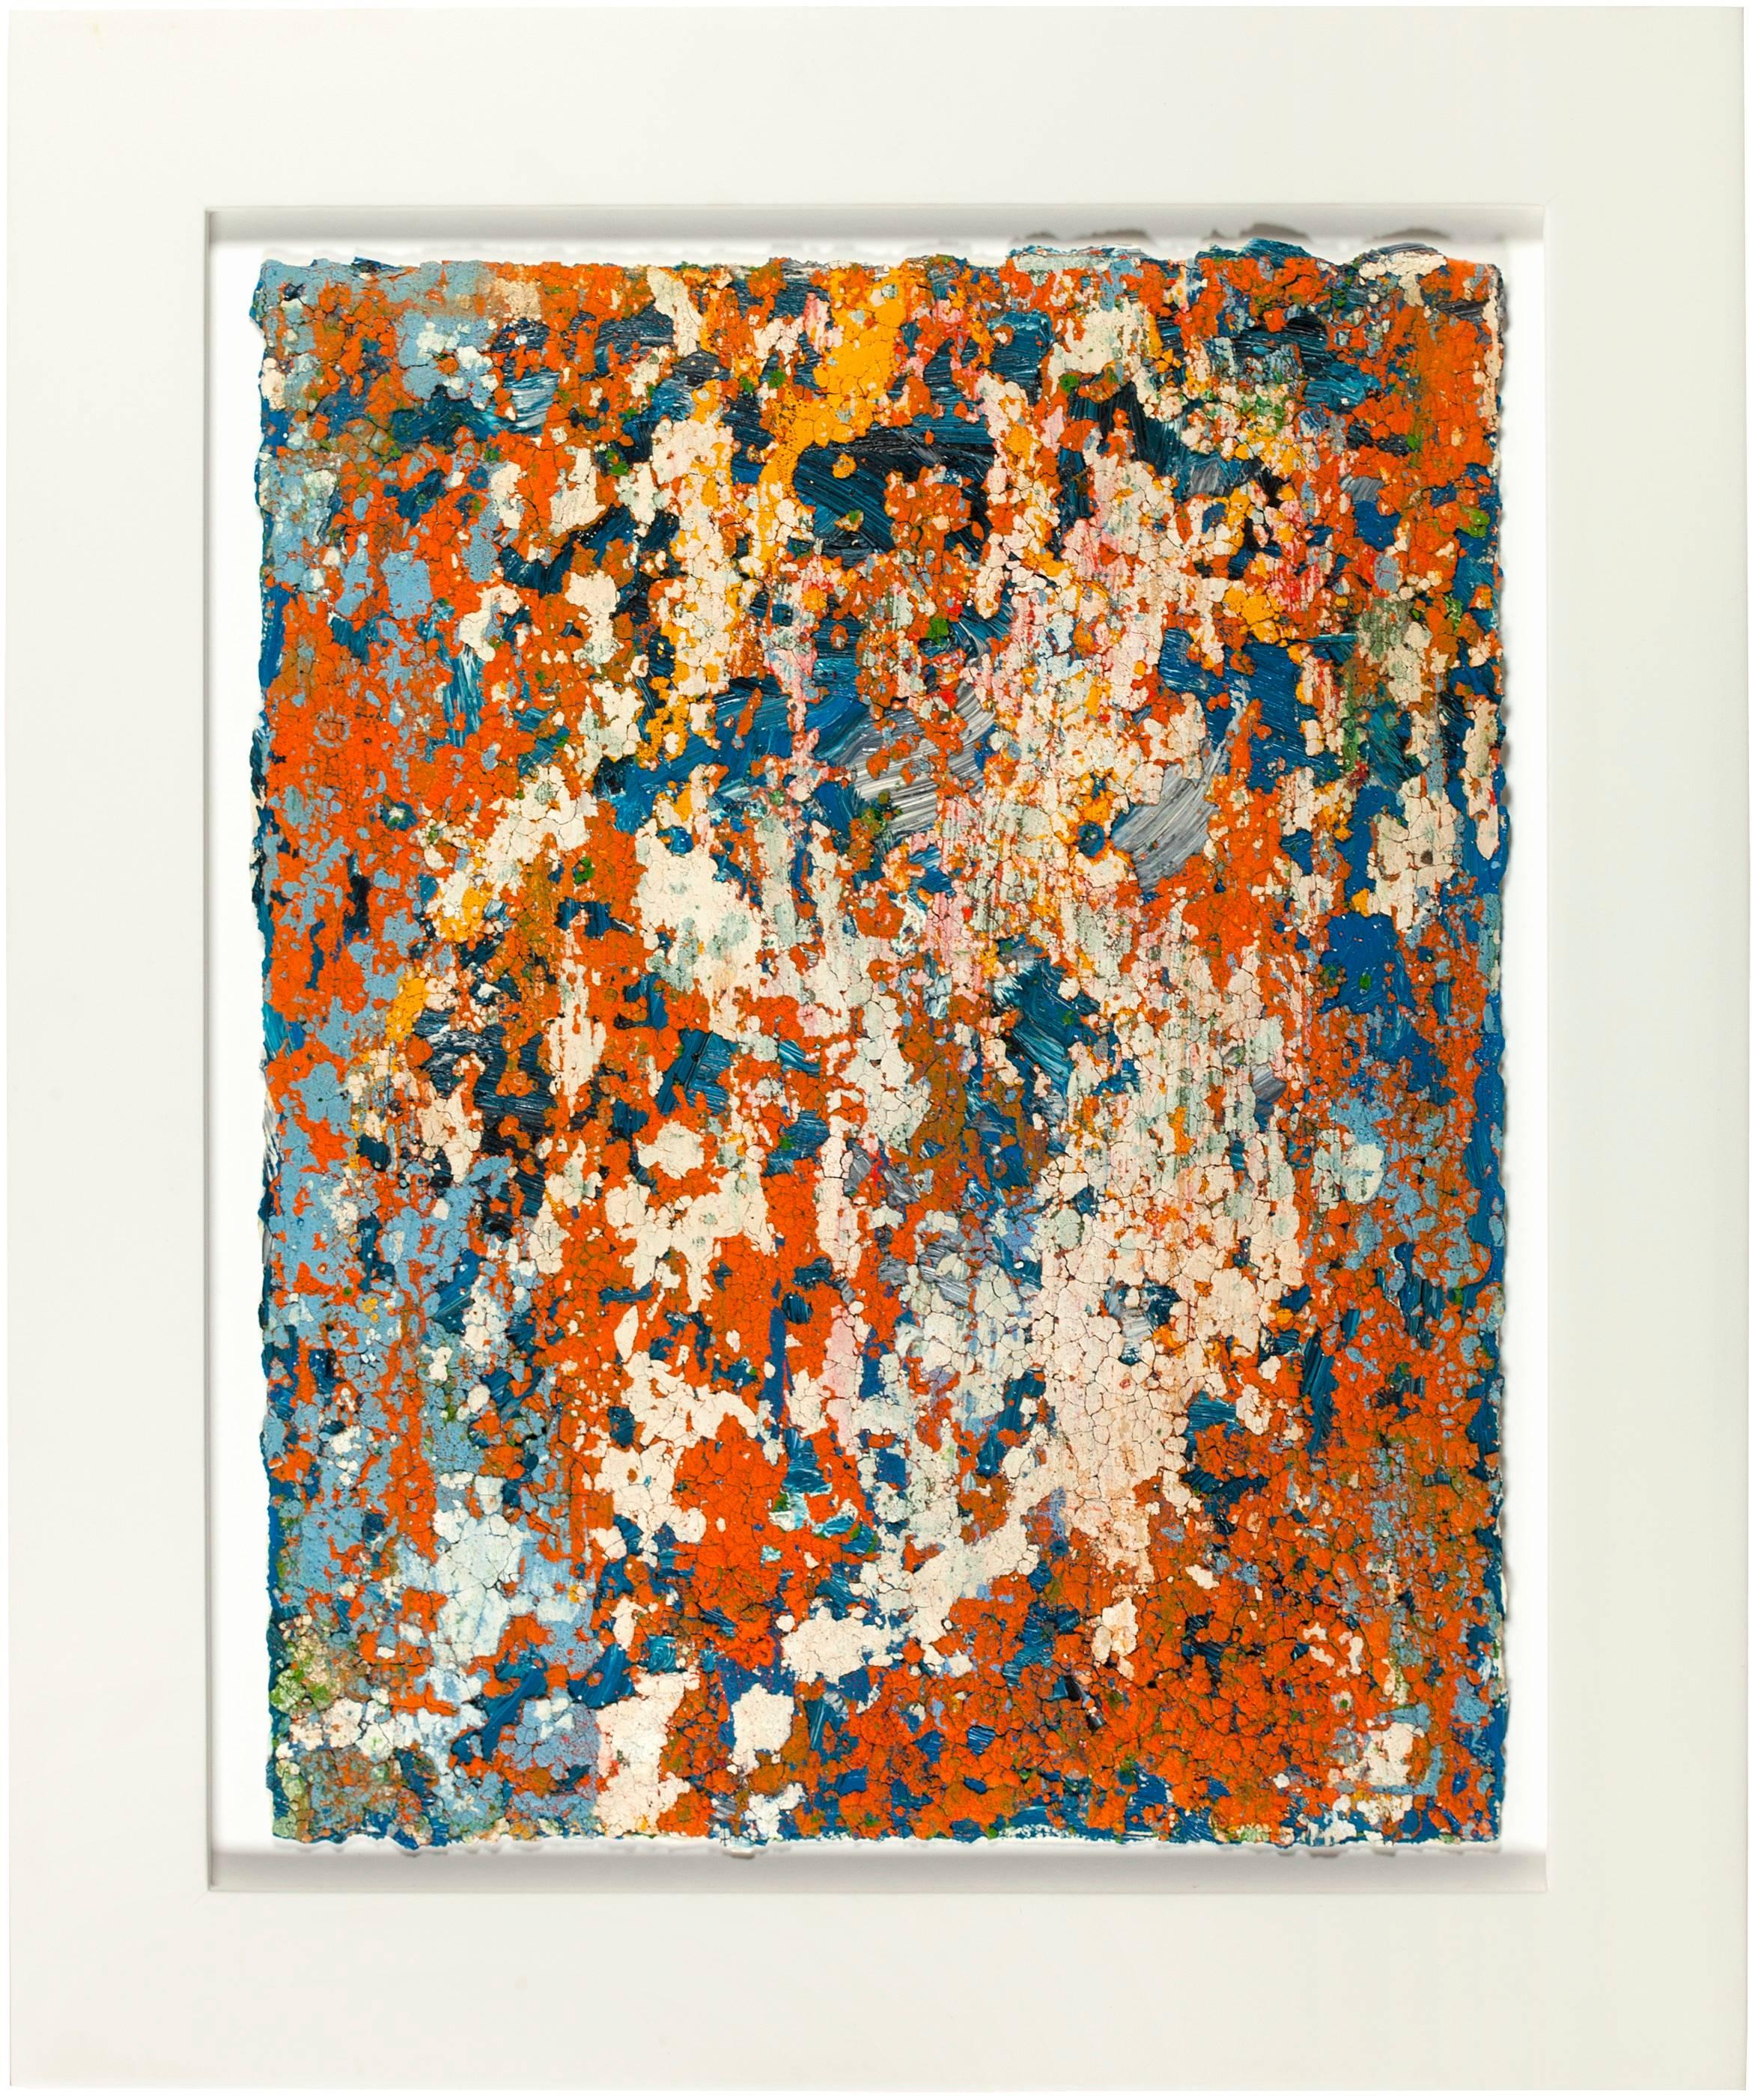 This purely abstract painting from 2005 by Rainer Gross is composed of layers of press orange, white, blue pigments, among a variety of other colors. In 1973, Rainer Gross left his studies in Fine Art at the Cologne Werkkunstschule to come to New